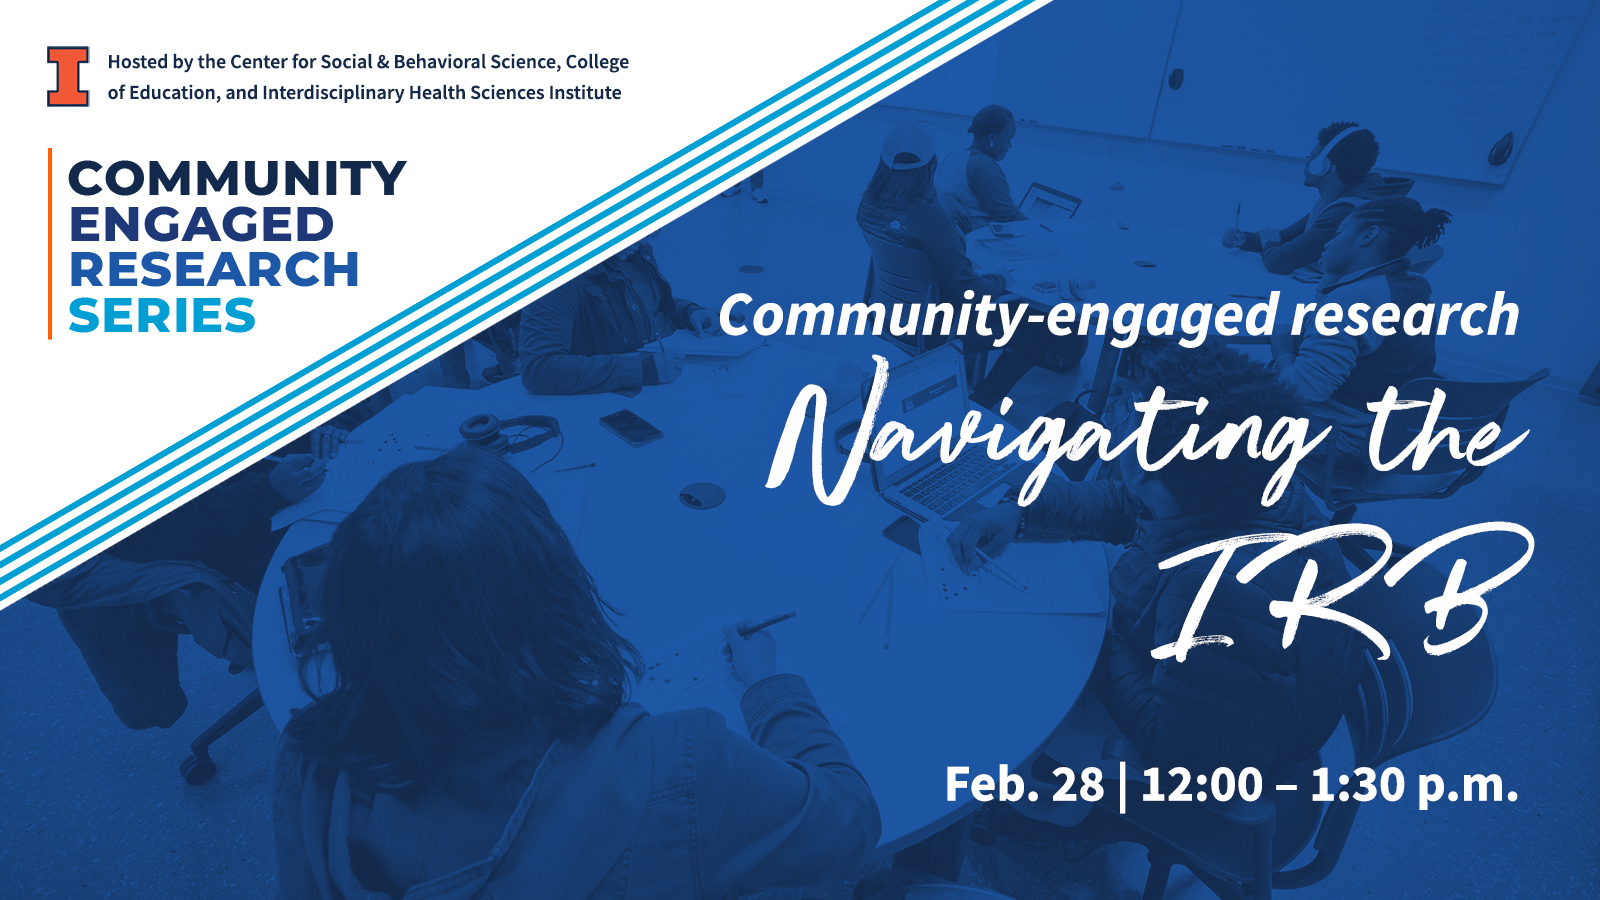 Community-Engaged Research Navigating the IRB Feb. 28 | 12:00 - 1:30 p.m. Community Engaged Research Series